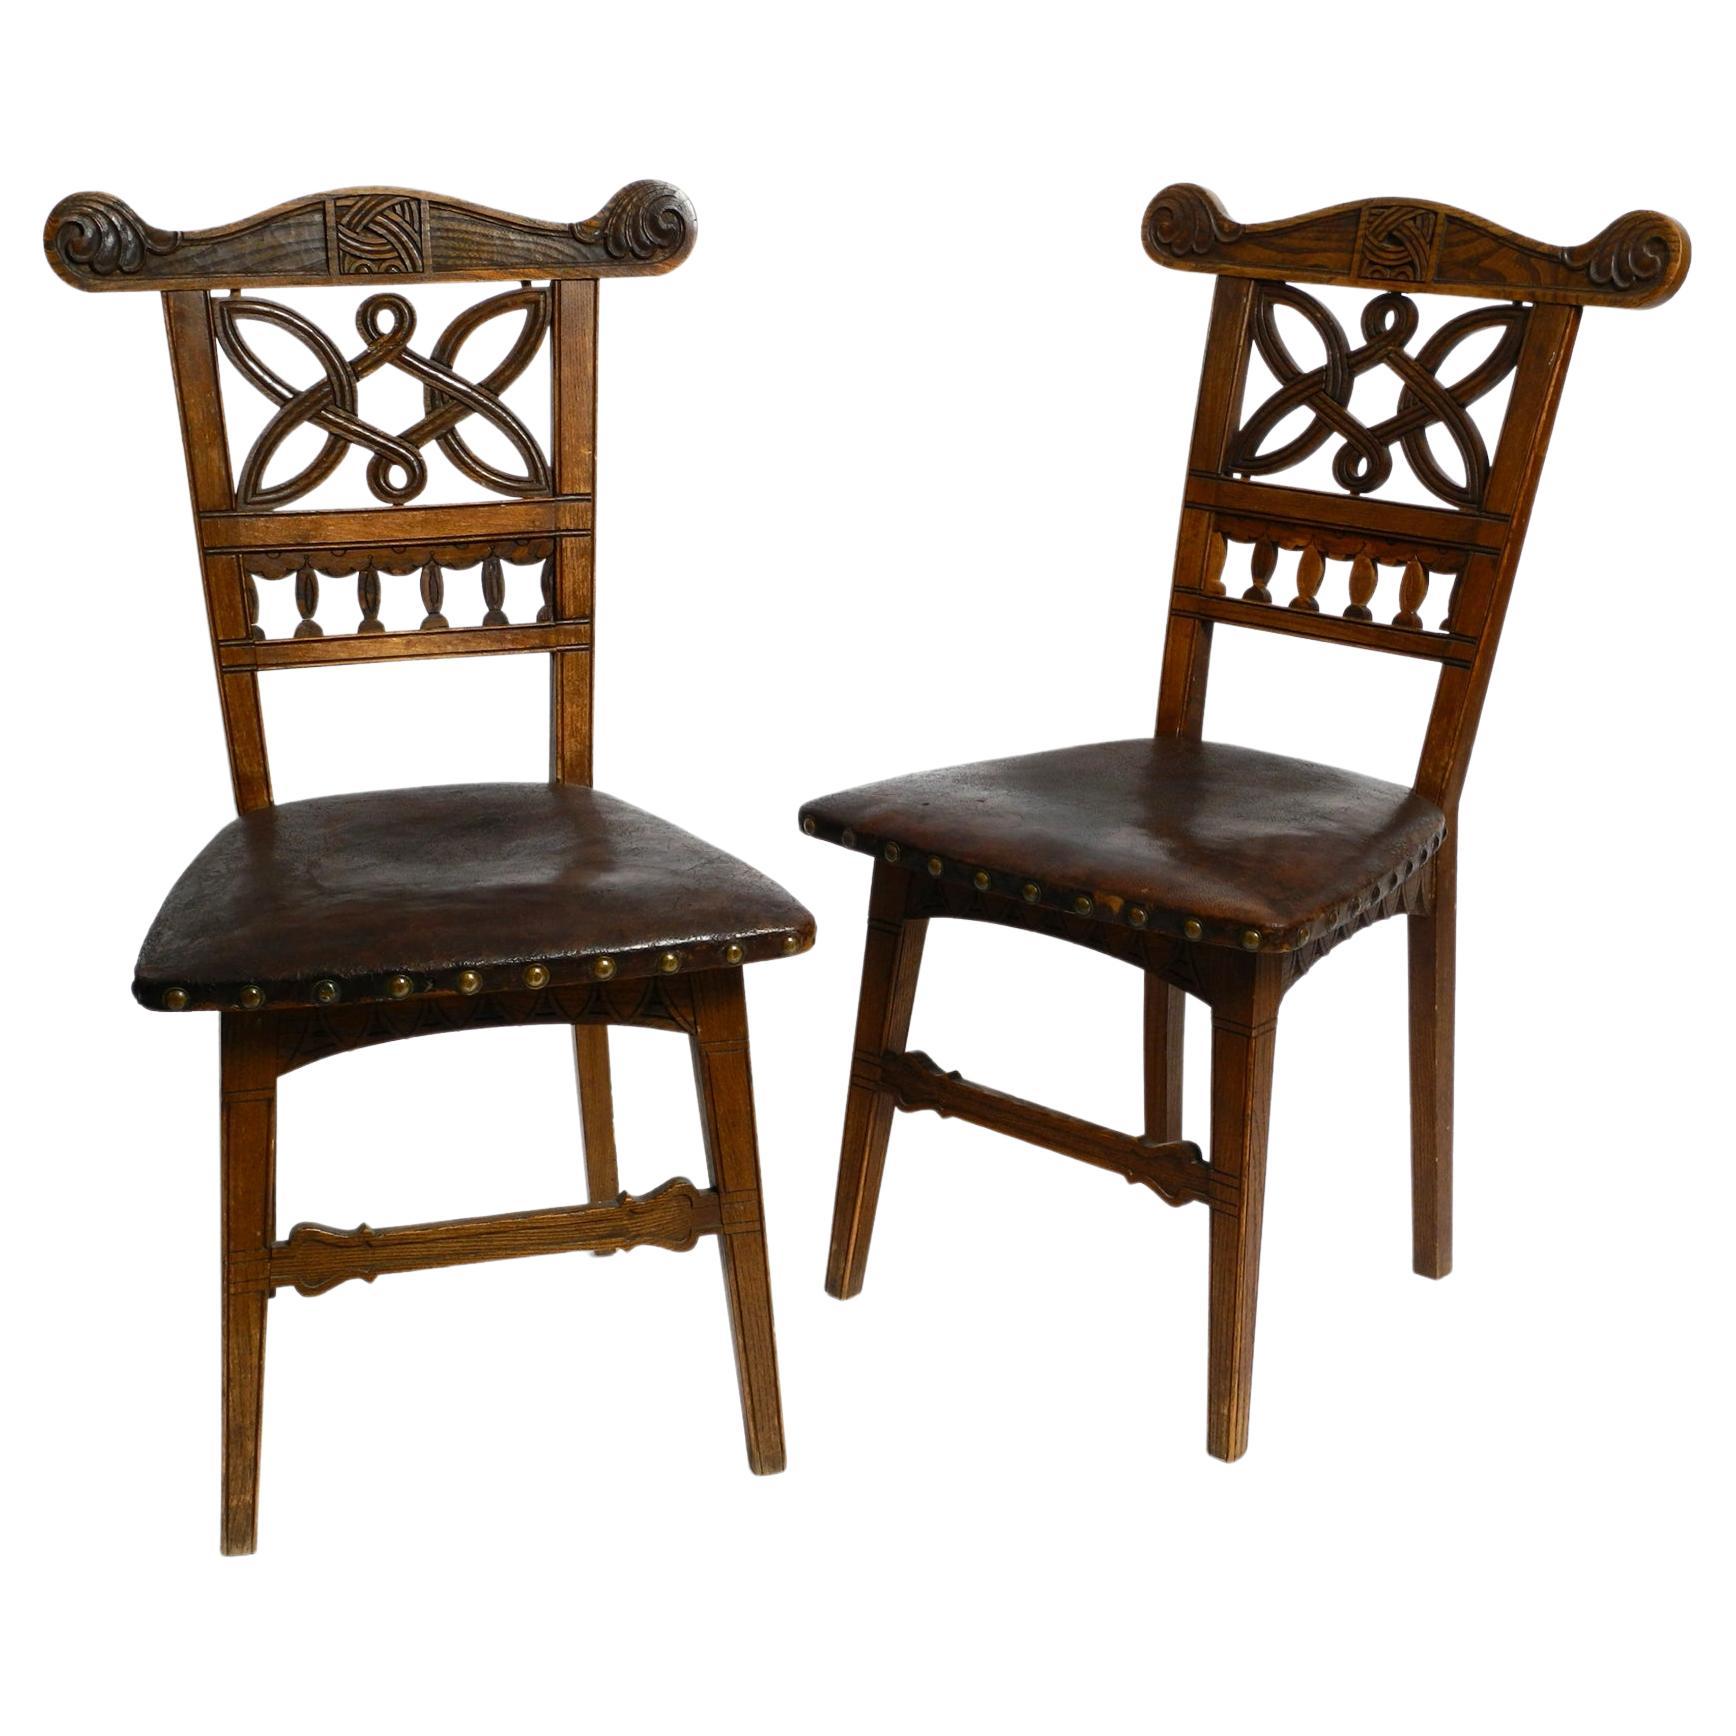 2 Art Nouveau Oak Chairs Still with the Original Leather Seats from Around 1900